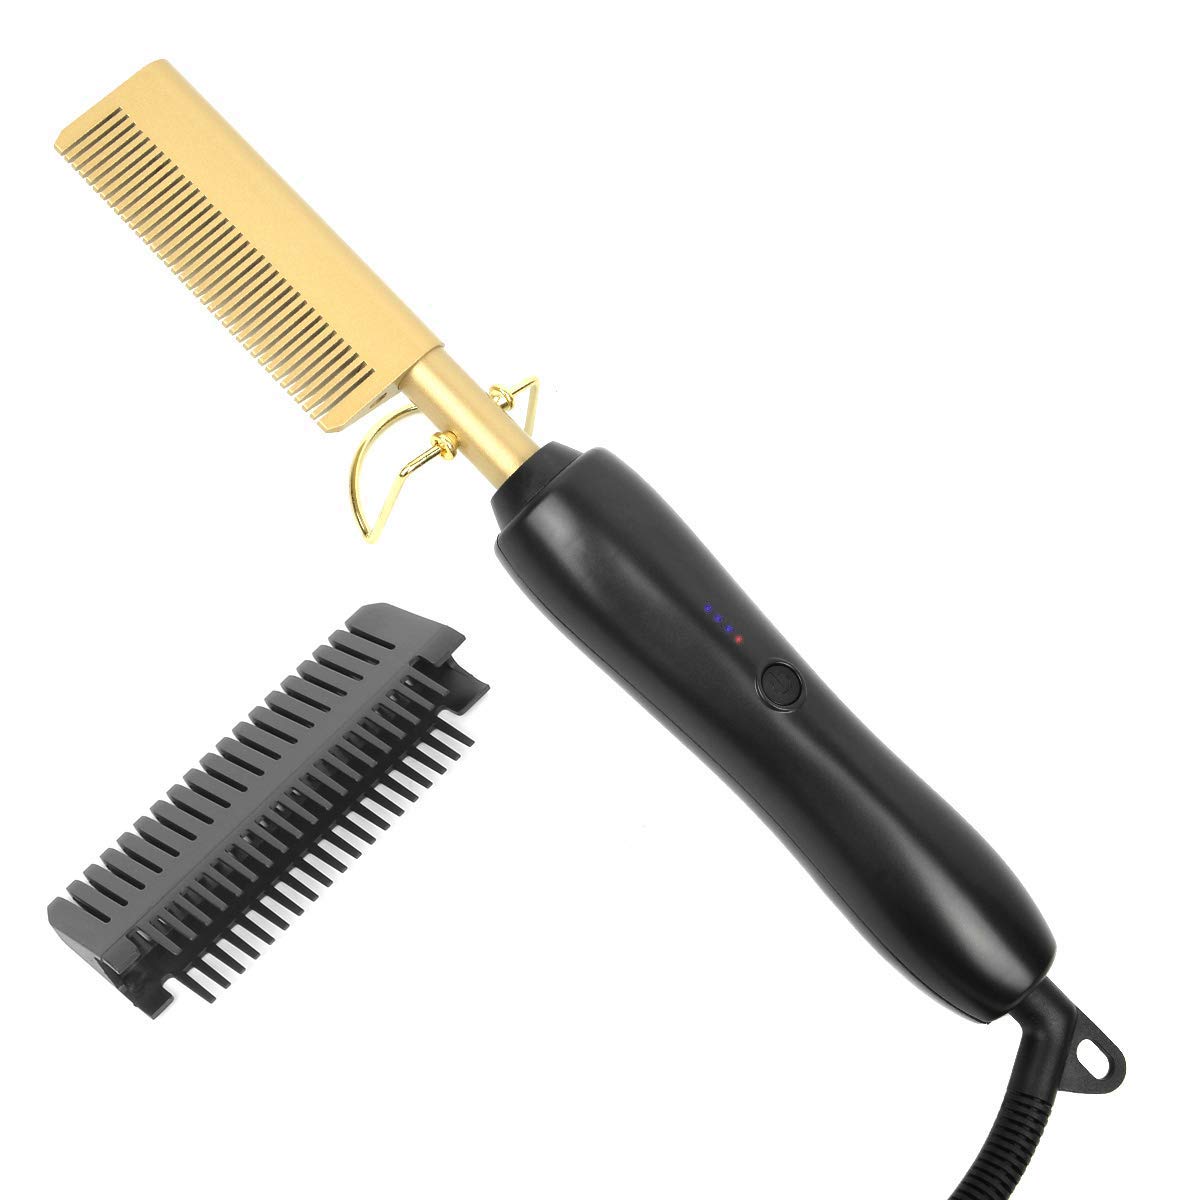 What is an electric comb?